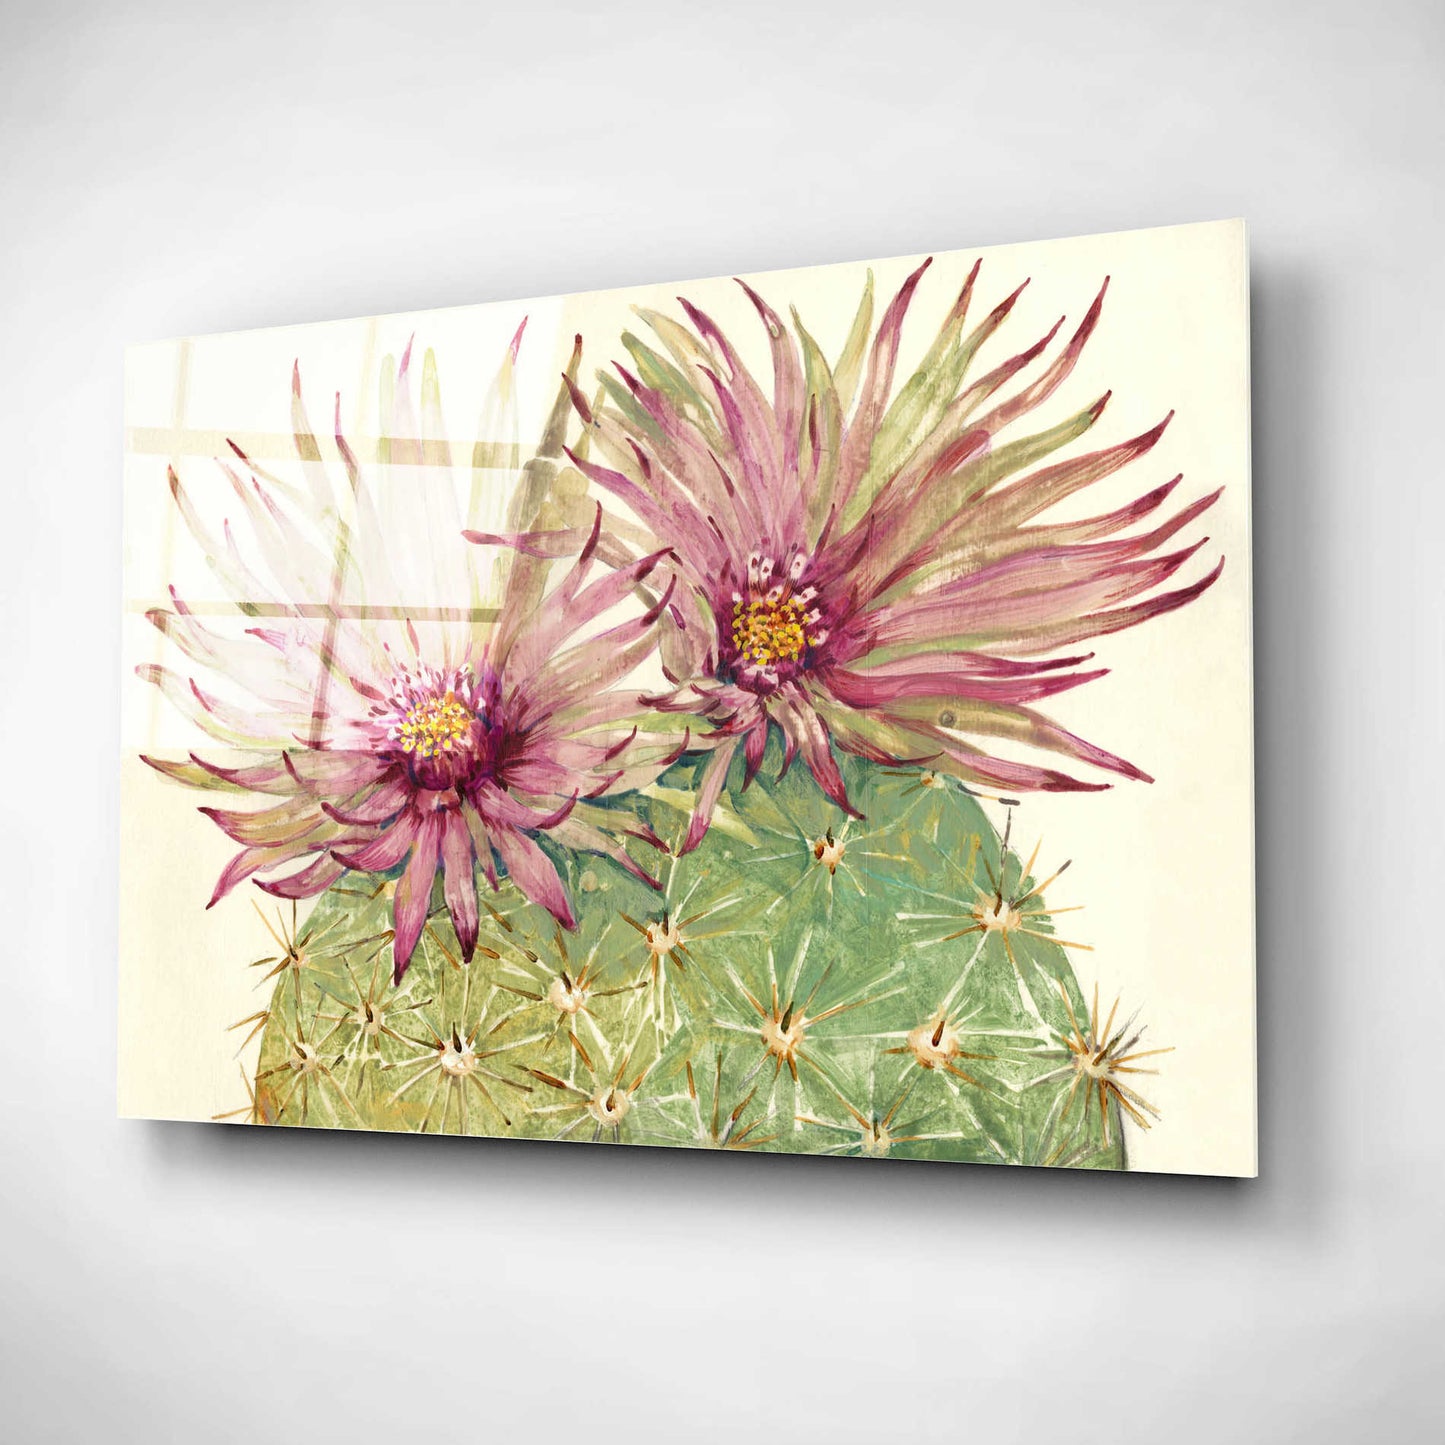 Epic Art 'Cactus Blossoms I' by Tim O'Toole, Acrylic Glass Wall Art,16x12